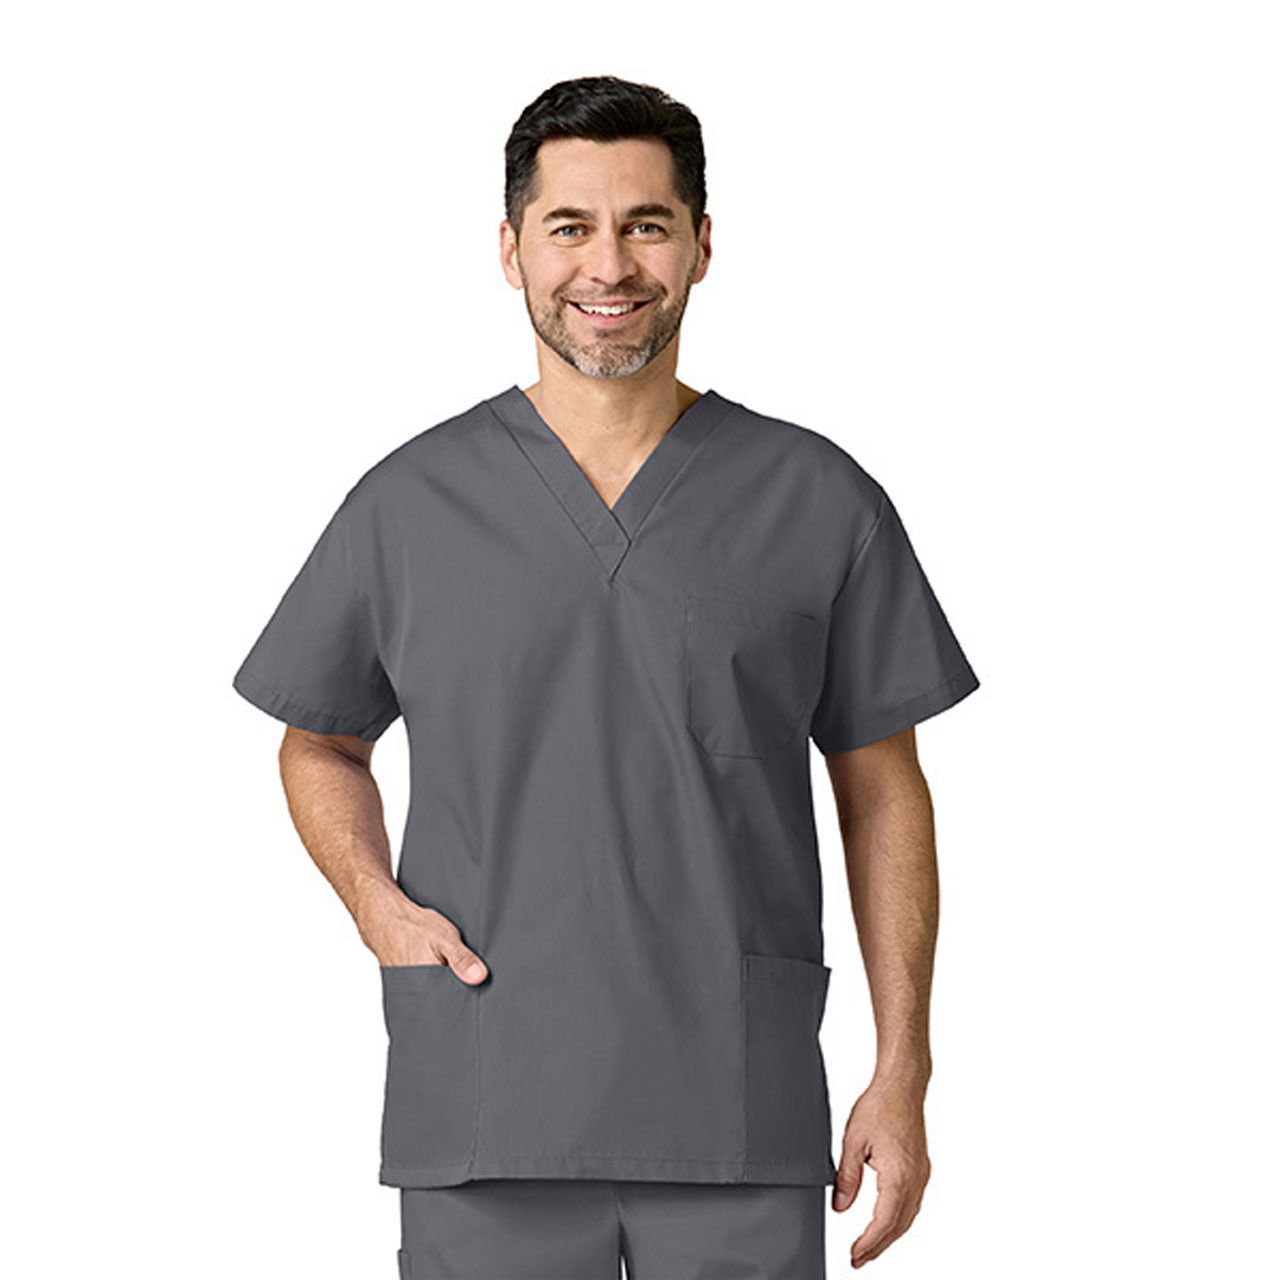 How many pockets does the Fashion Seal Scrub Top have?